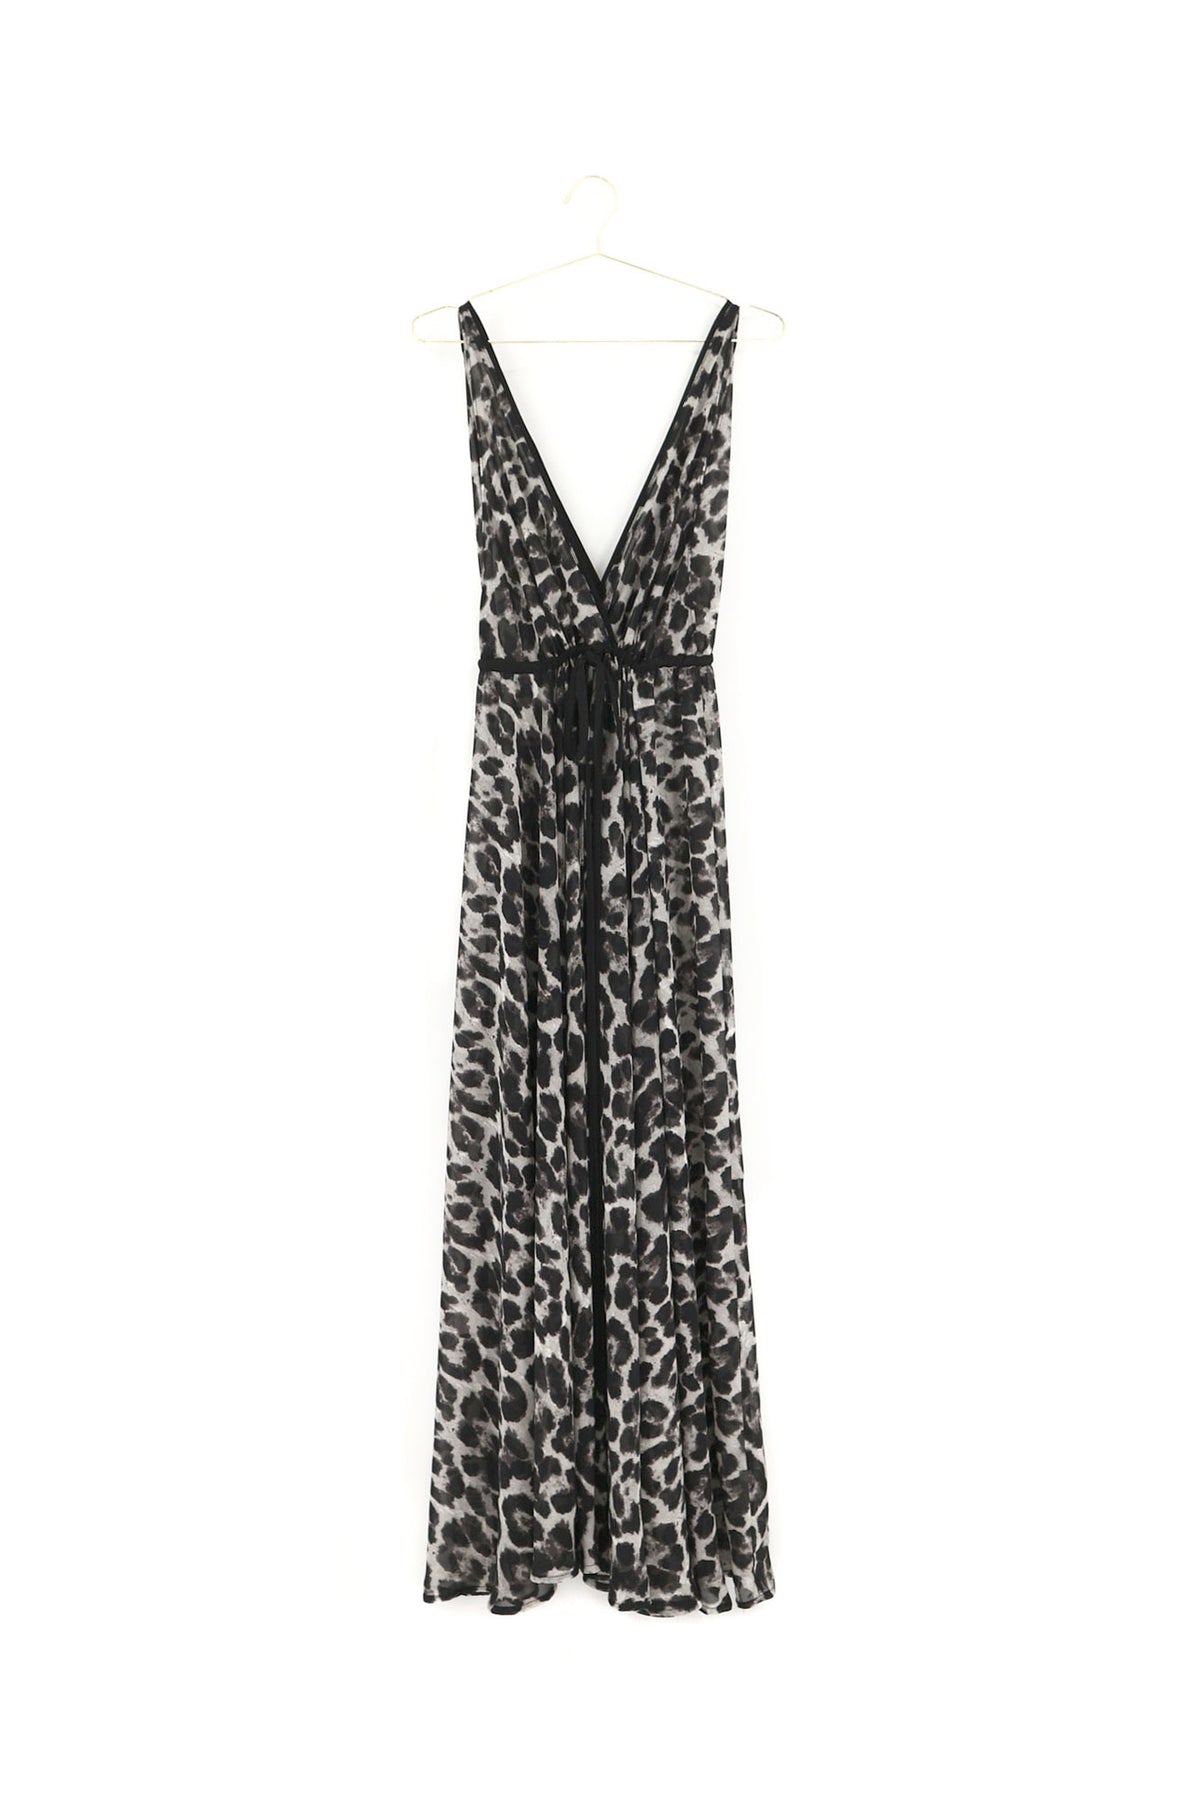 loose fitted flowing maxi dress with waist drawstring in grey leopard print